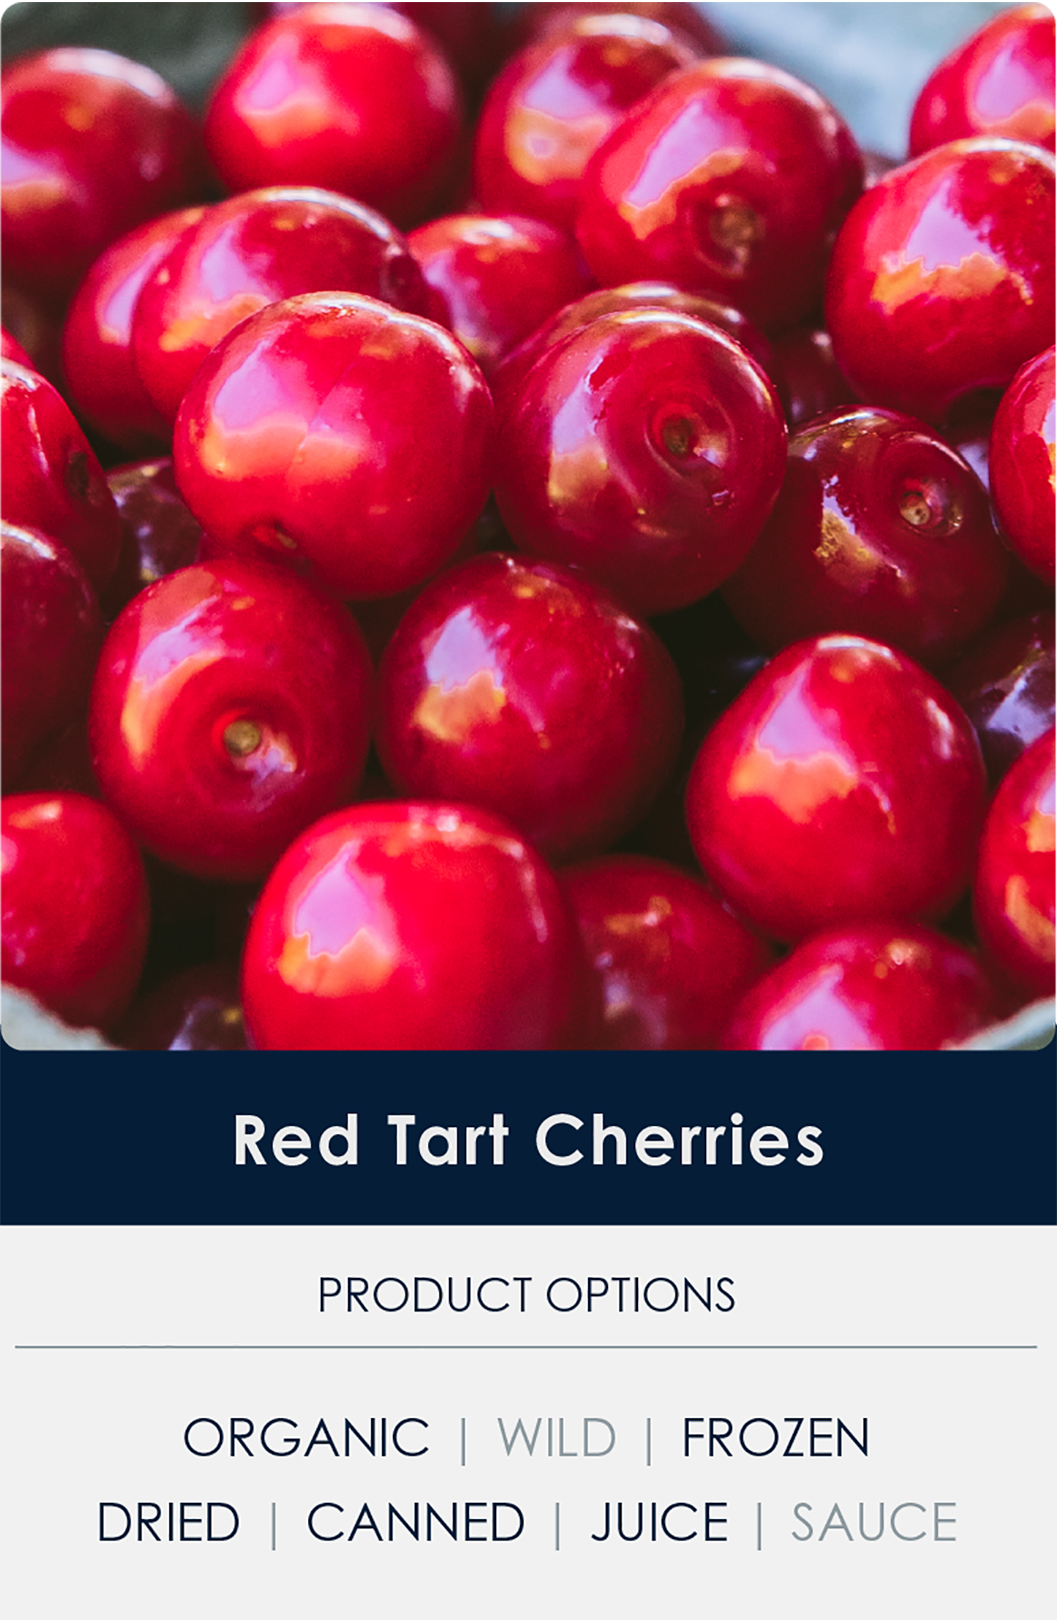 Red tart cherries above a list of product options: organic, wild, frozen, dried, canned, juice, sauce.